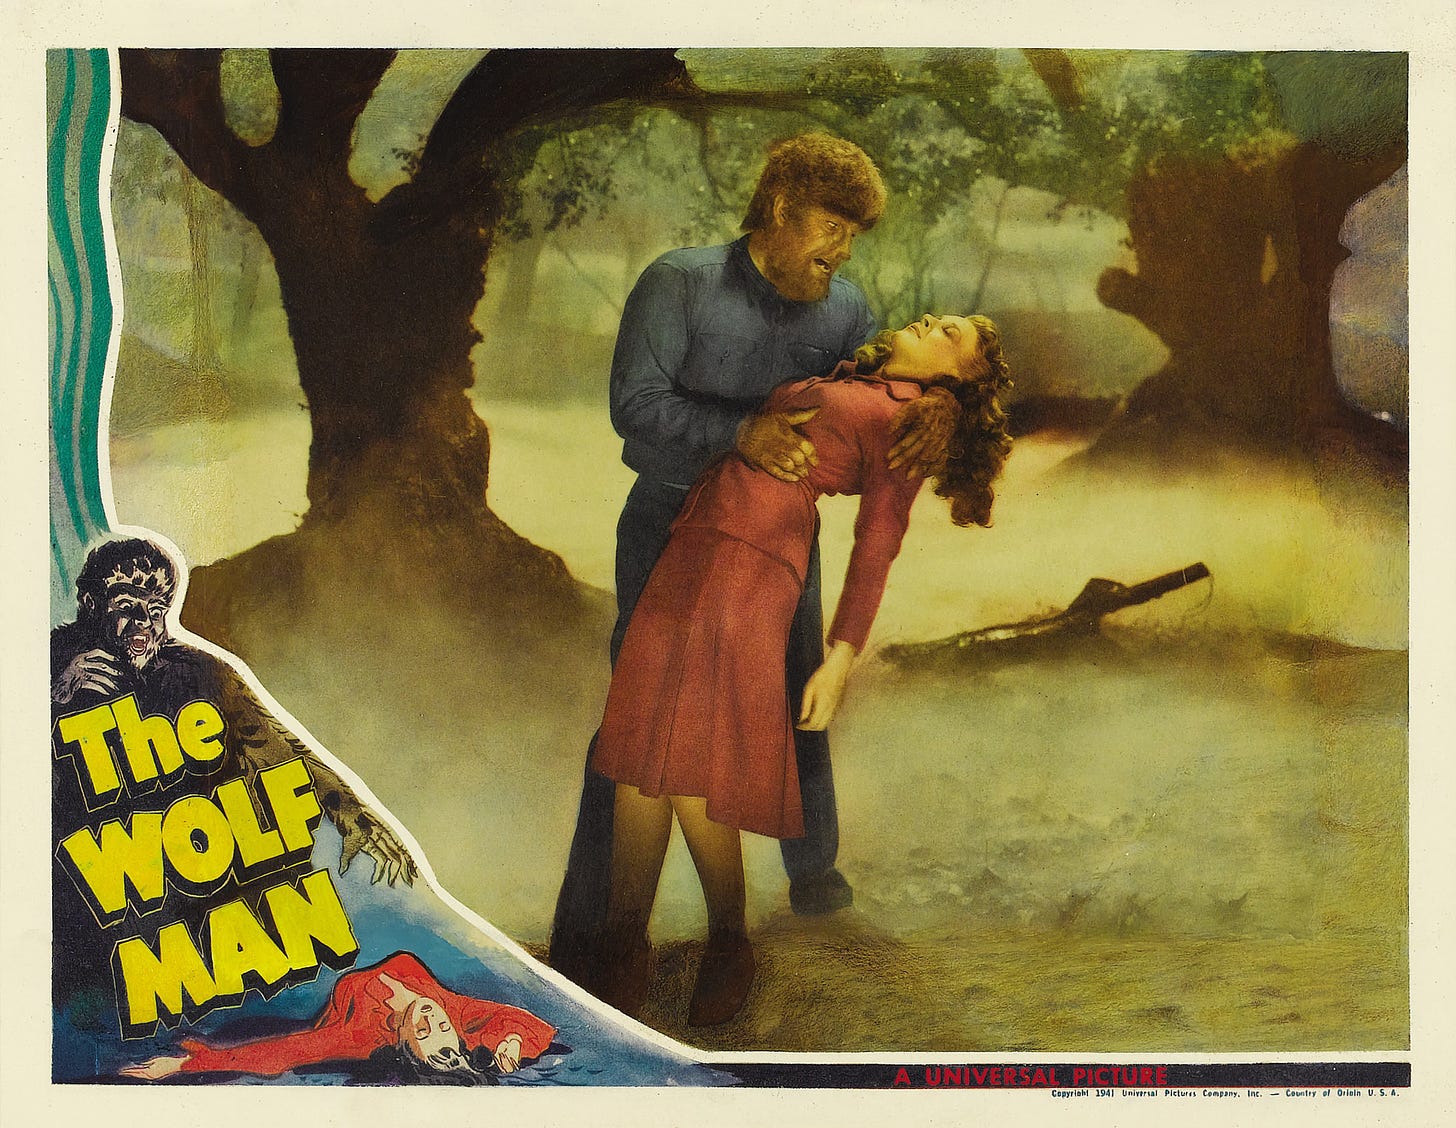 Does 1941's 'The Wolfman' hold up? • AIPT